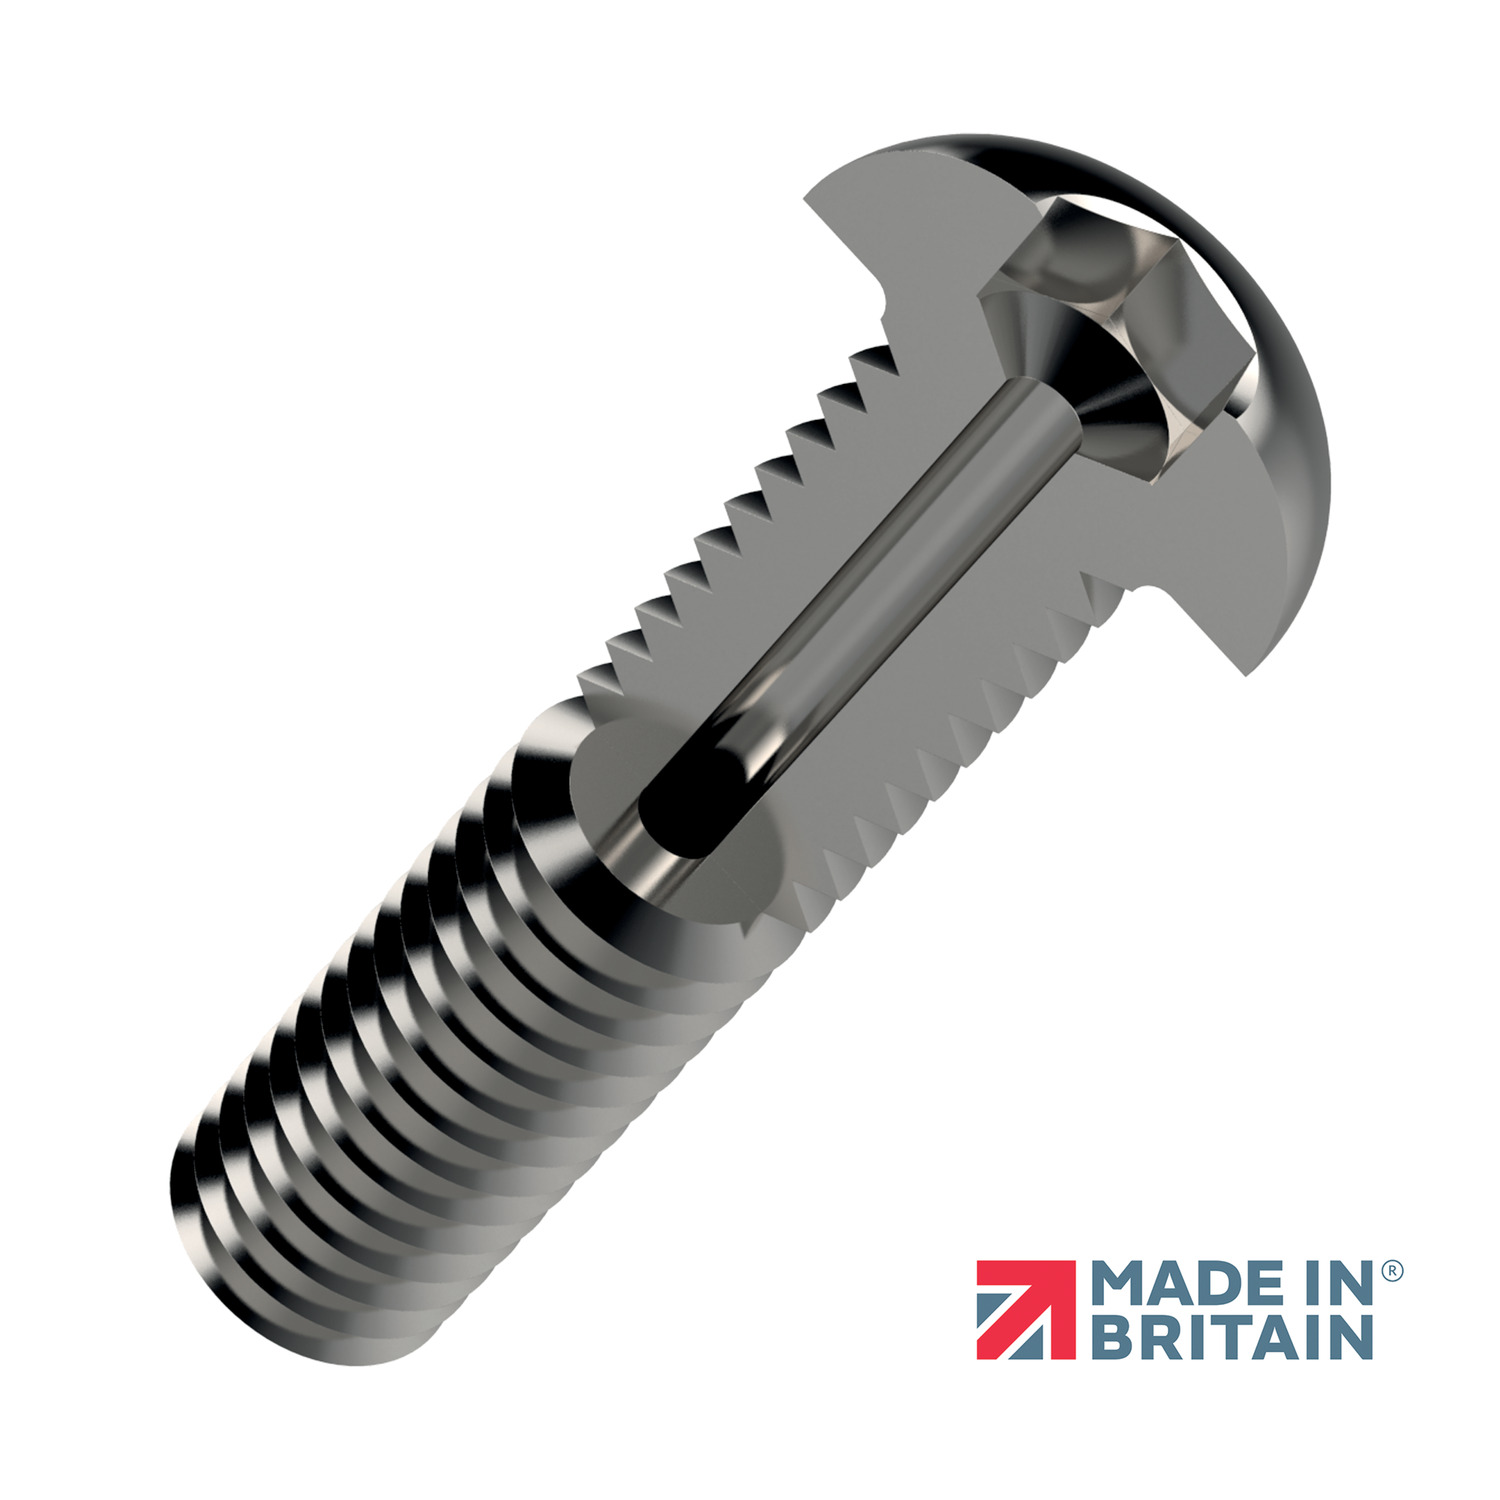 Vented Screws -  Socket Button Head Socket button hed vented screw in AISI 304 series stainless steel. AISI 316 stainless steel version also available (P0094.A4). To ISO 7380 (with central vent).